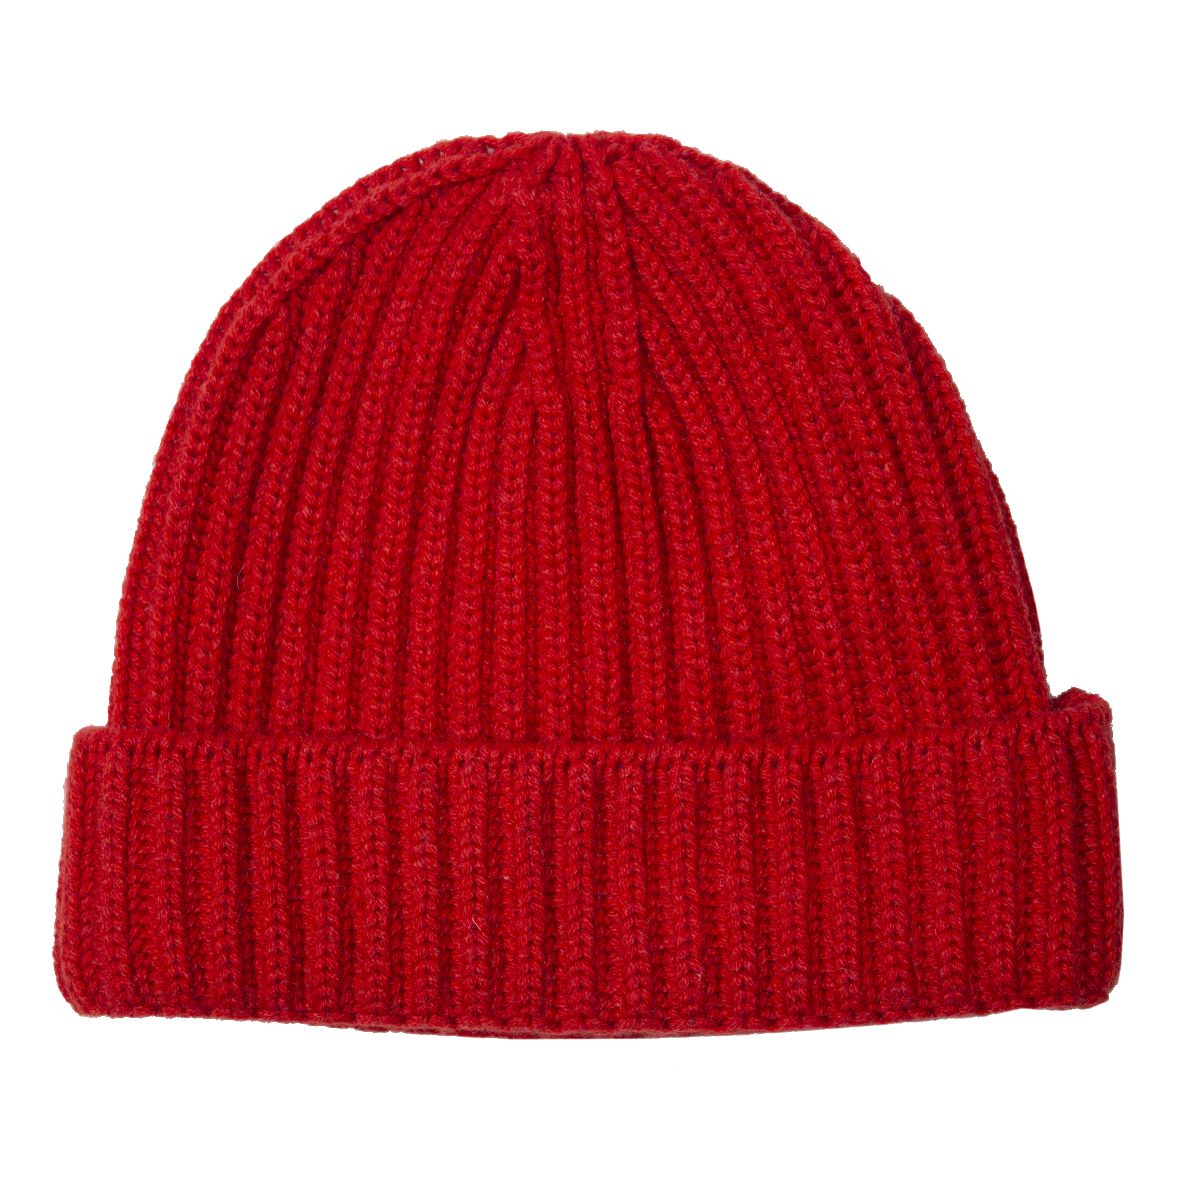 Fisherman Knit 8ply Cashmere Hat - Vreeland Red  Robert Old   